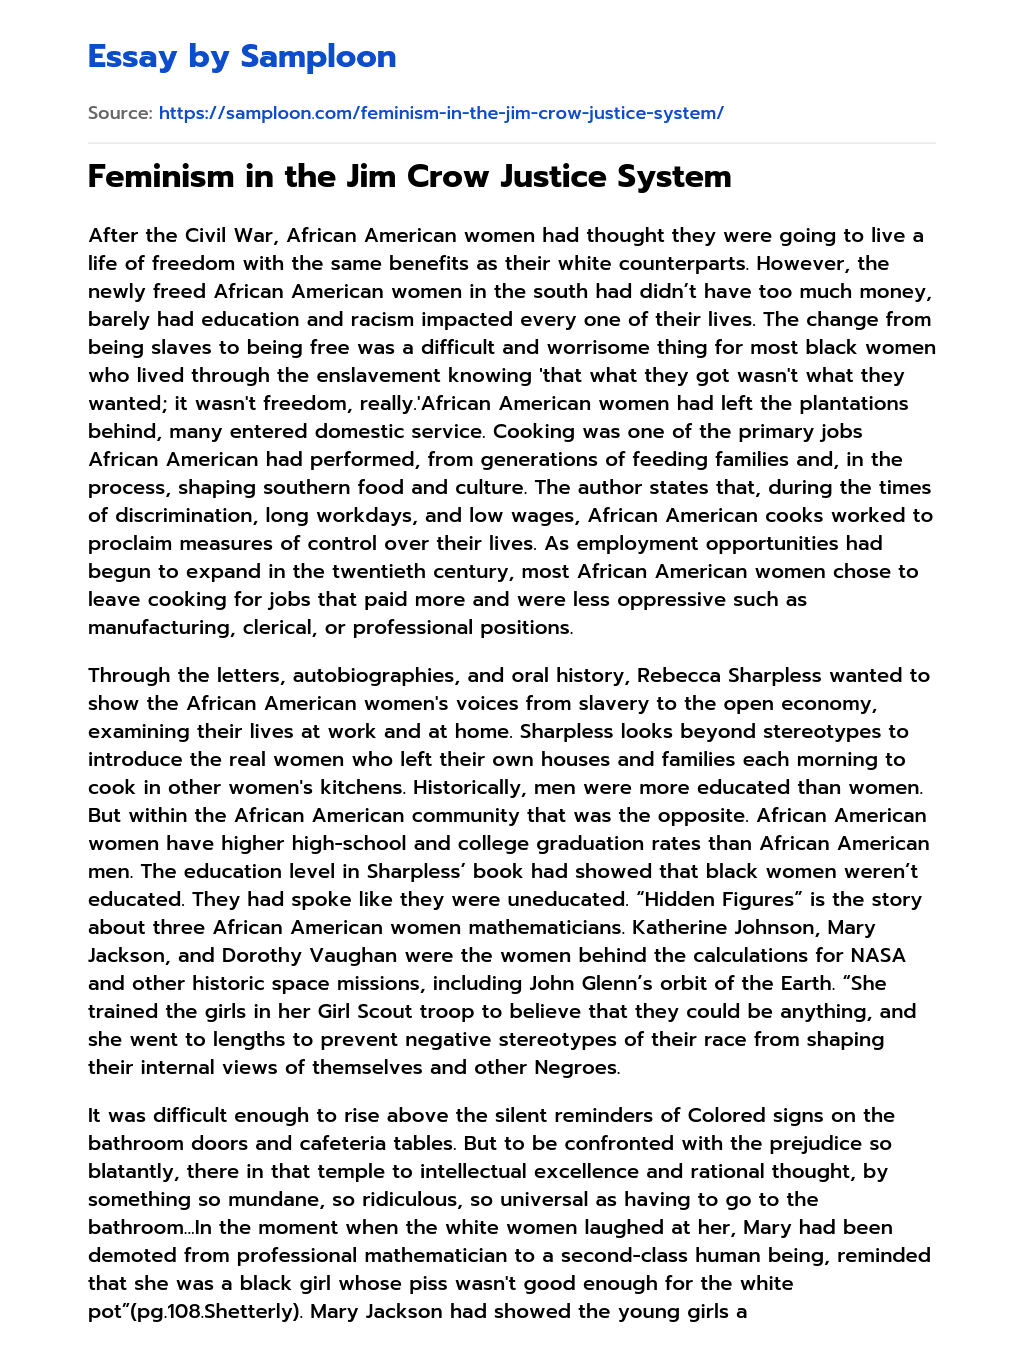 Feminism in the Jim Crow Justice System essay